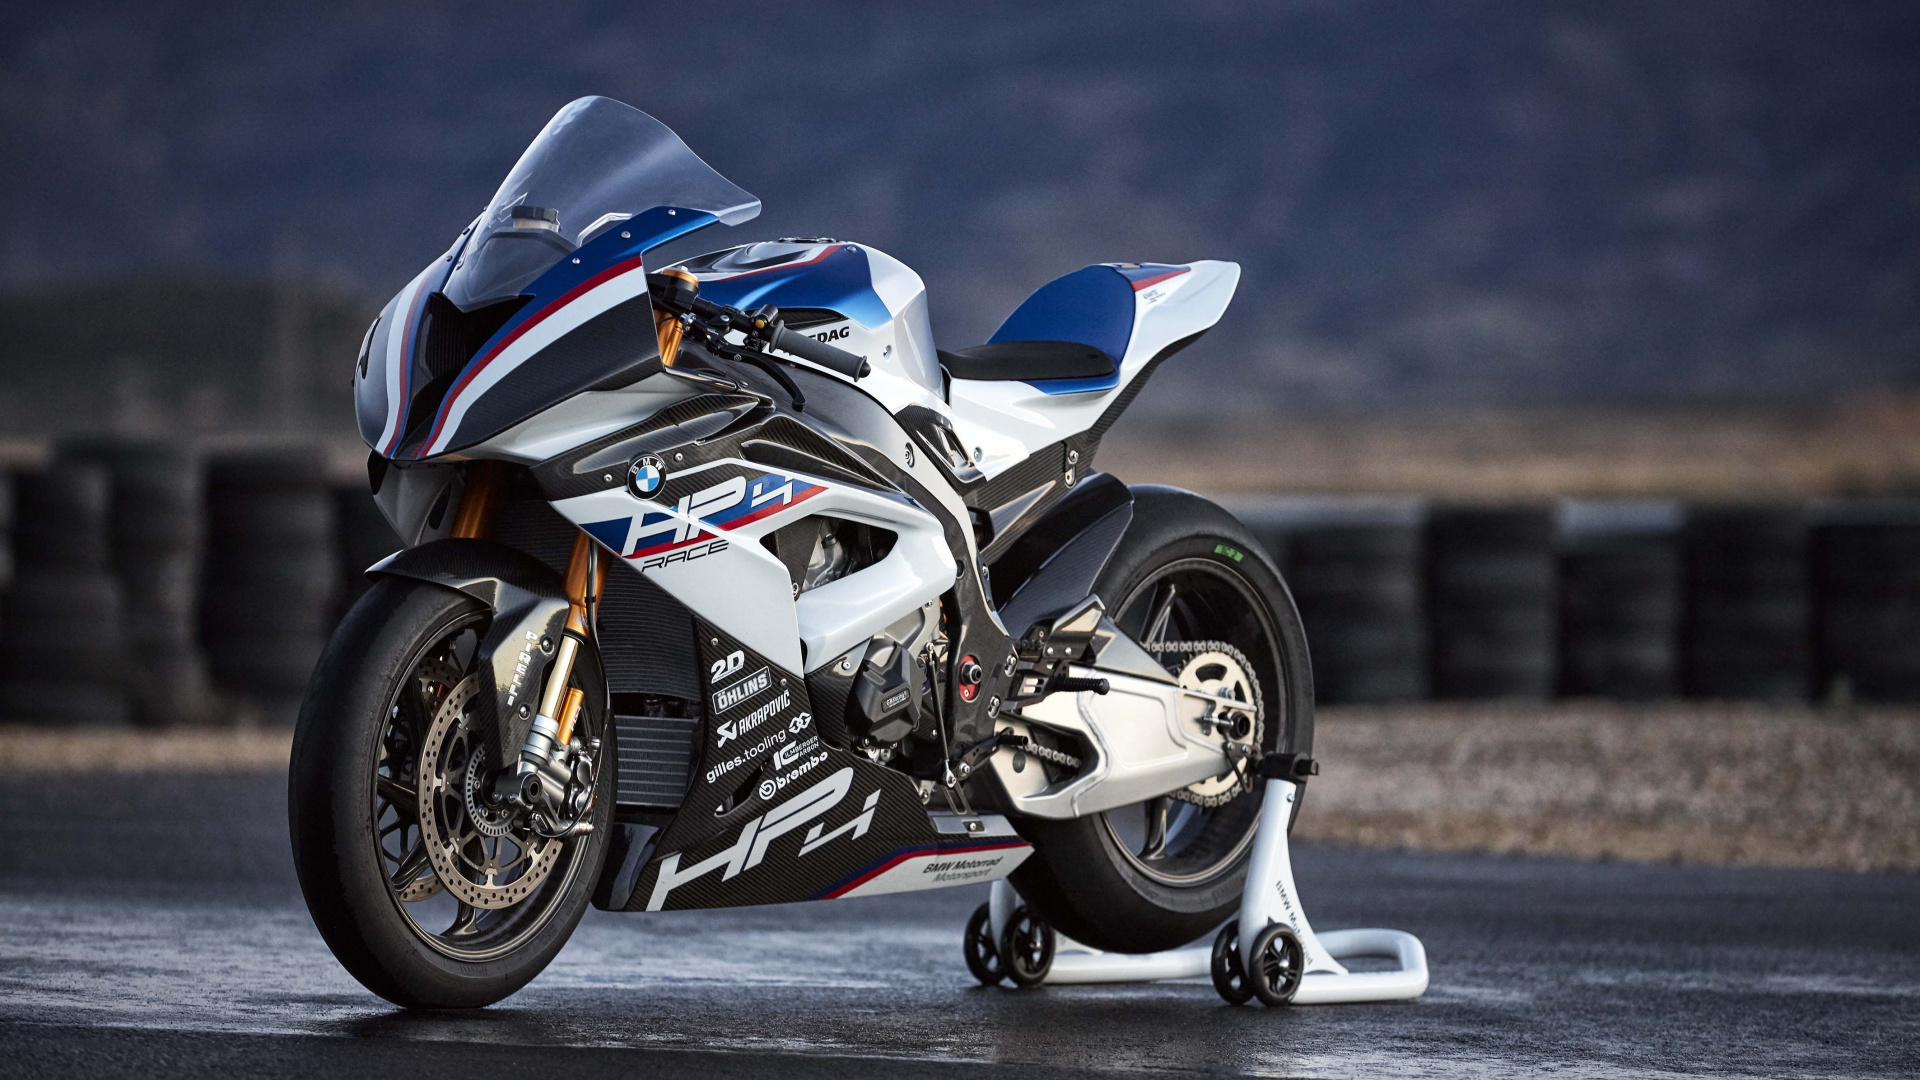 White and Black Sports Bike. Wallpaper in 1920x1080 Resolution